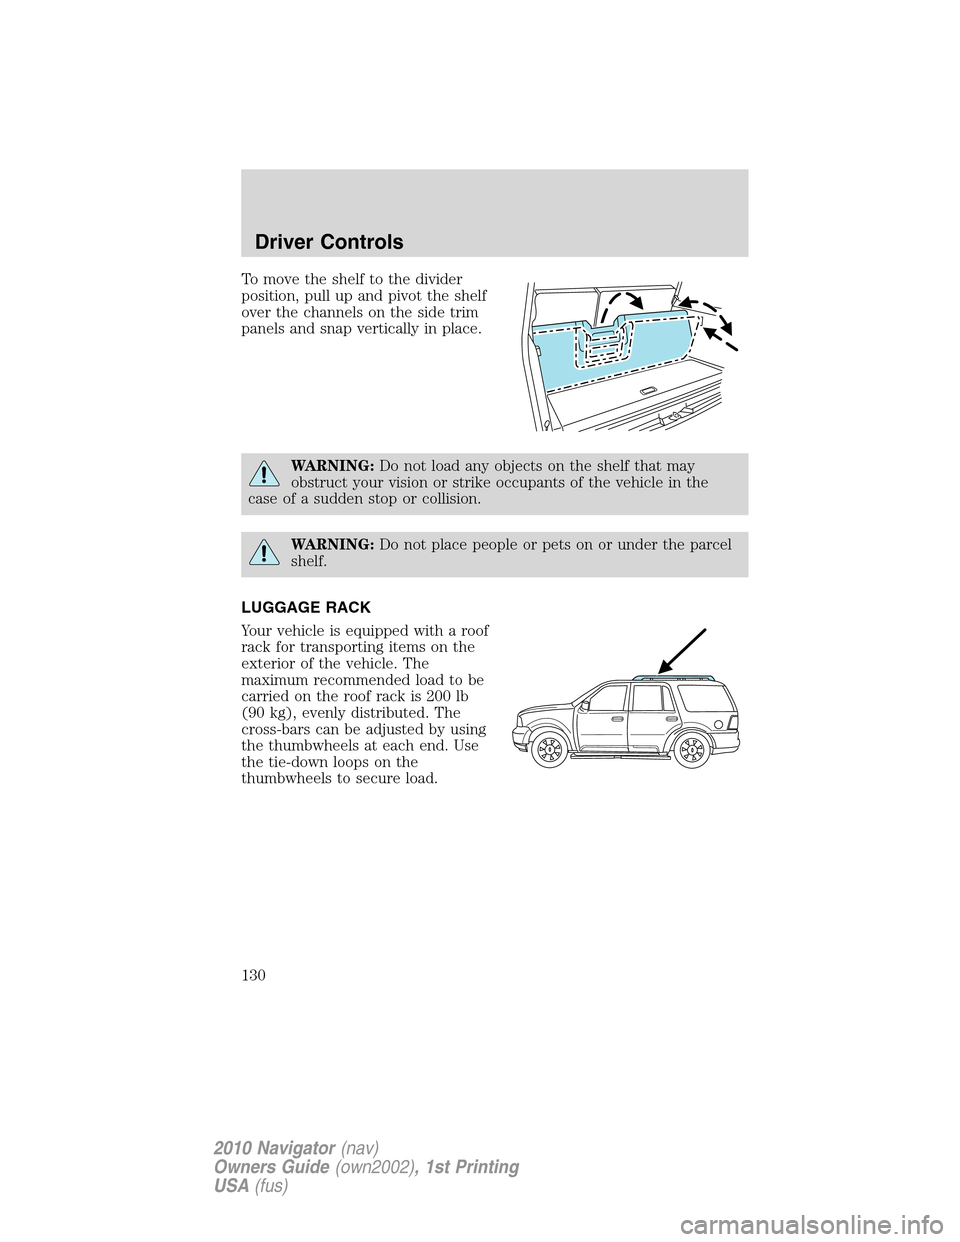 LINCOLN NAVIGATOR 2010  Owners Manual To move the shelf to the divider
position, pull up and pivot the shelf
over the channels on the side trim
panels and snap vertically in place.
WARNING:Do not load any objects on the shelf that may
obs